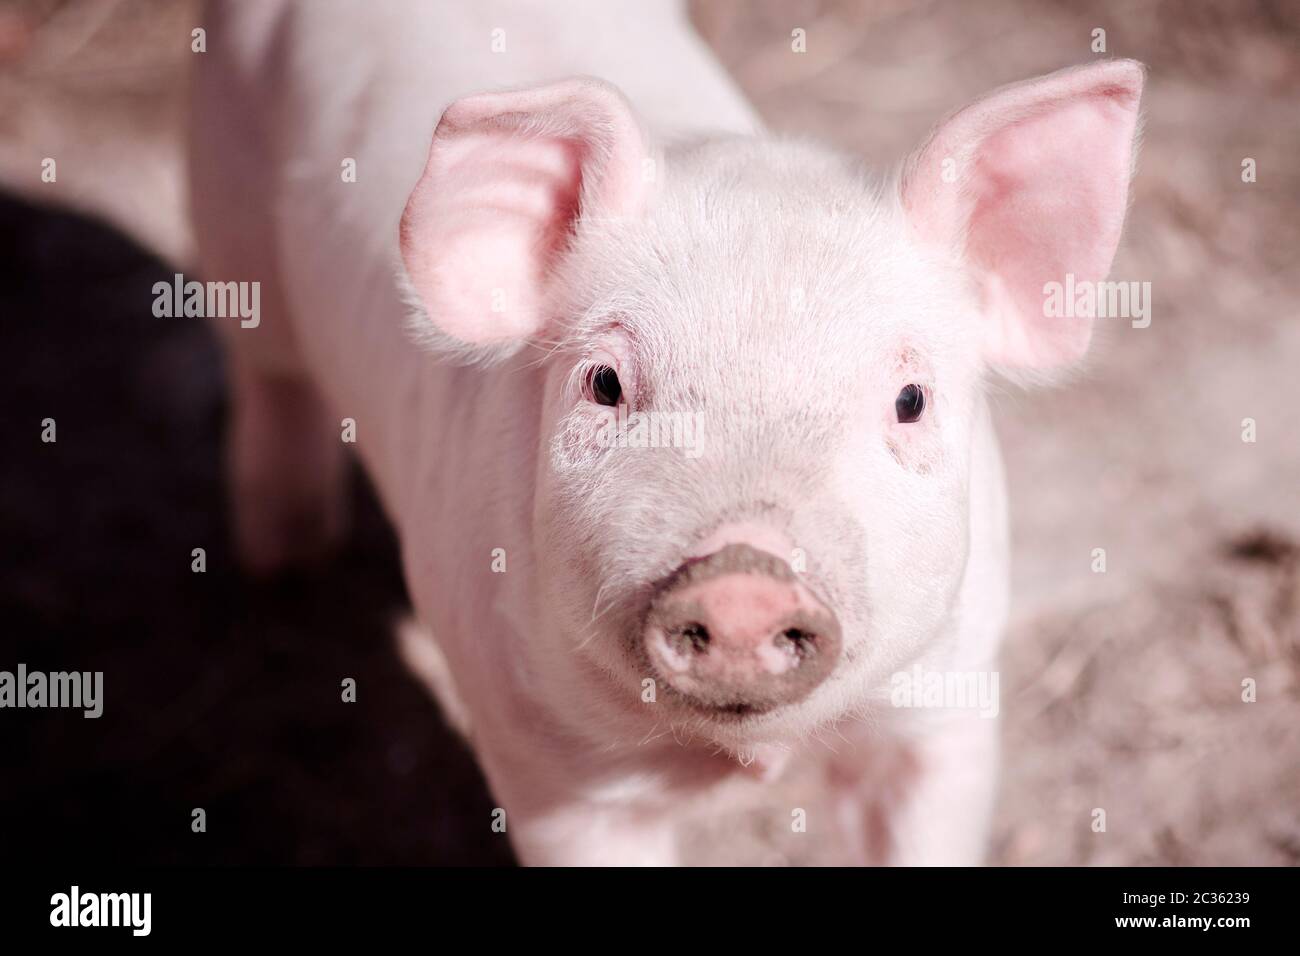 The cute little pig is looking at camera. Stock Photo